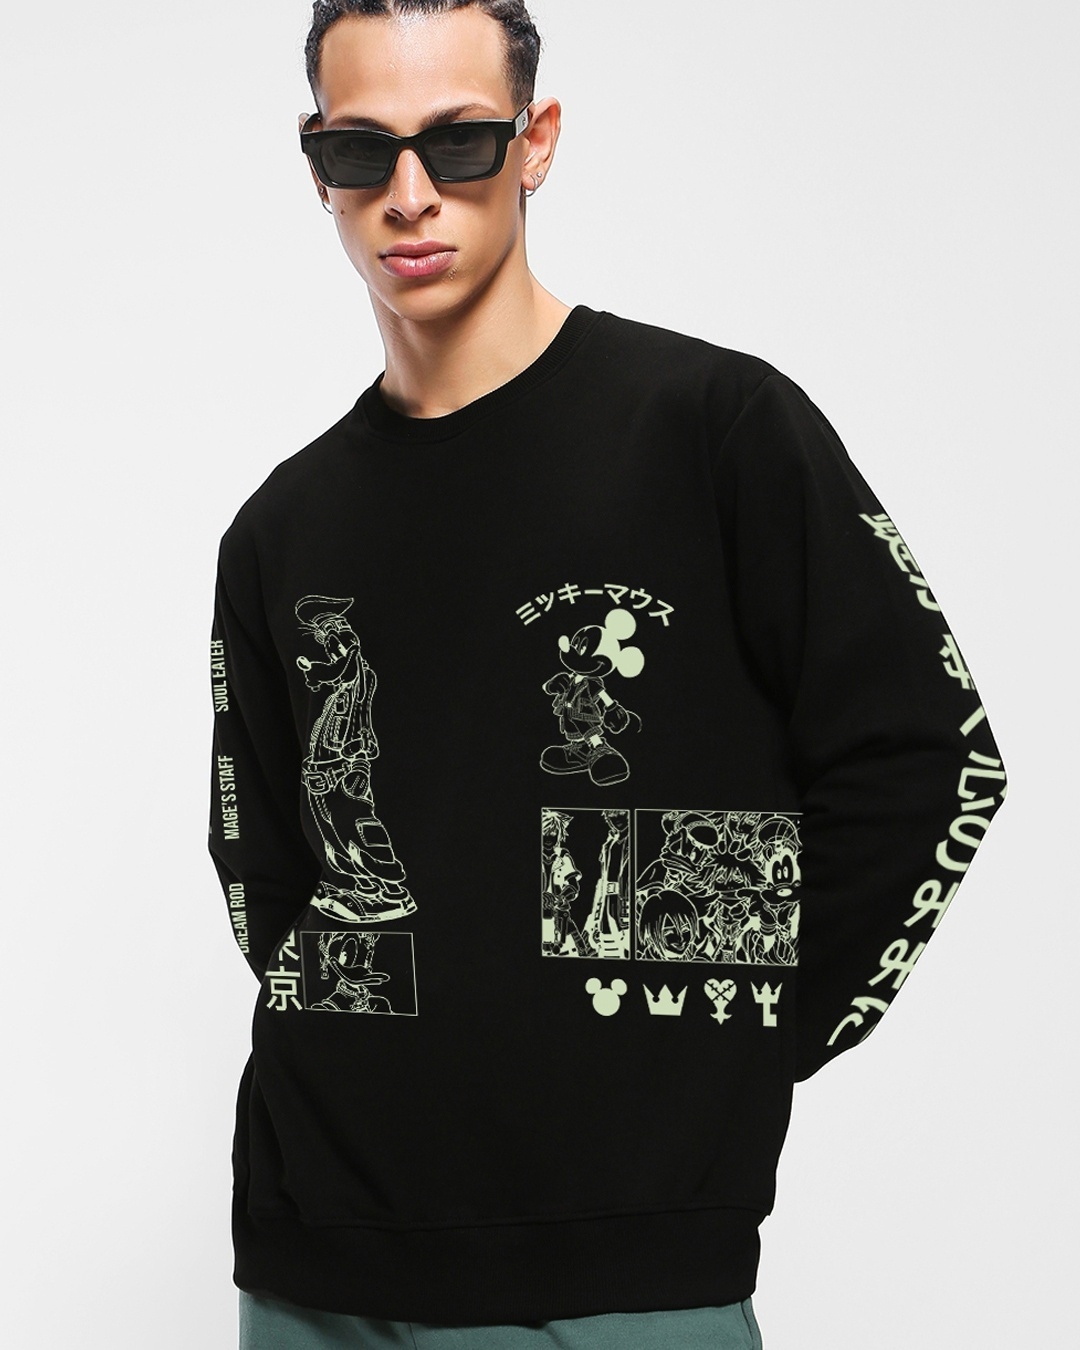 Men's Black Mickey's Kingdom Graphic Printed Sweatshirt paired with baggy jeans